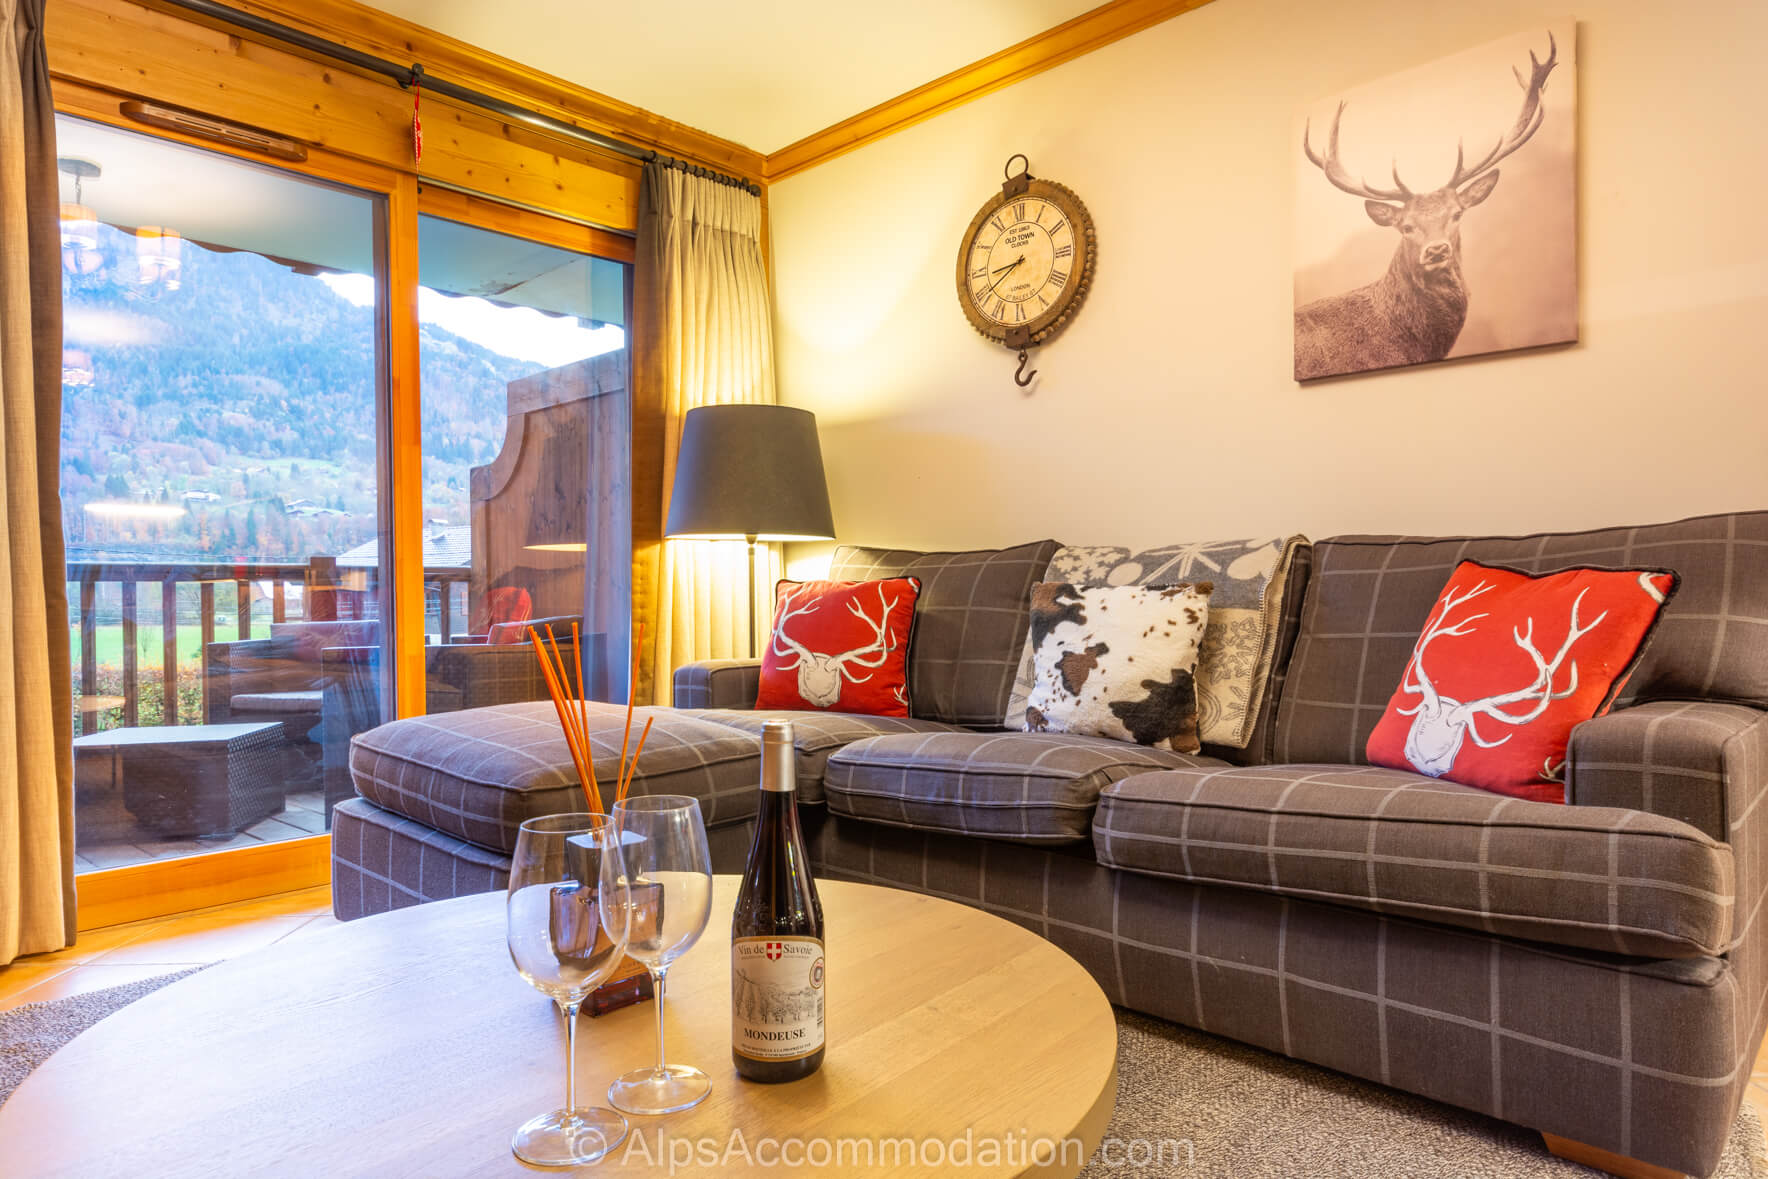 Chardons Argentes G6 Samoëns - Great views over the valley from the living area